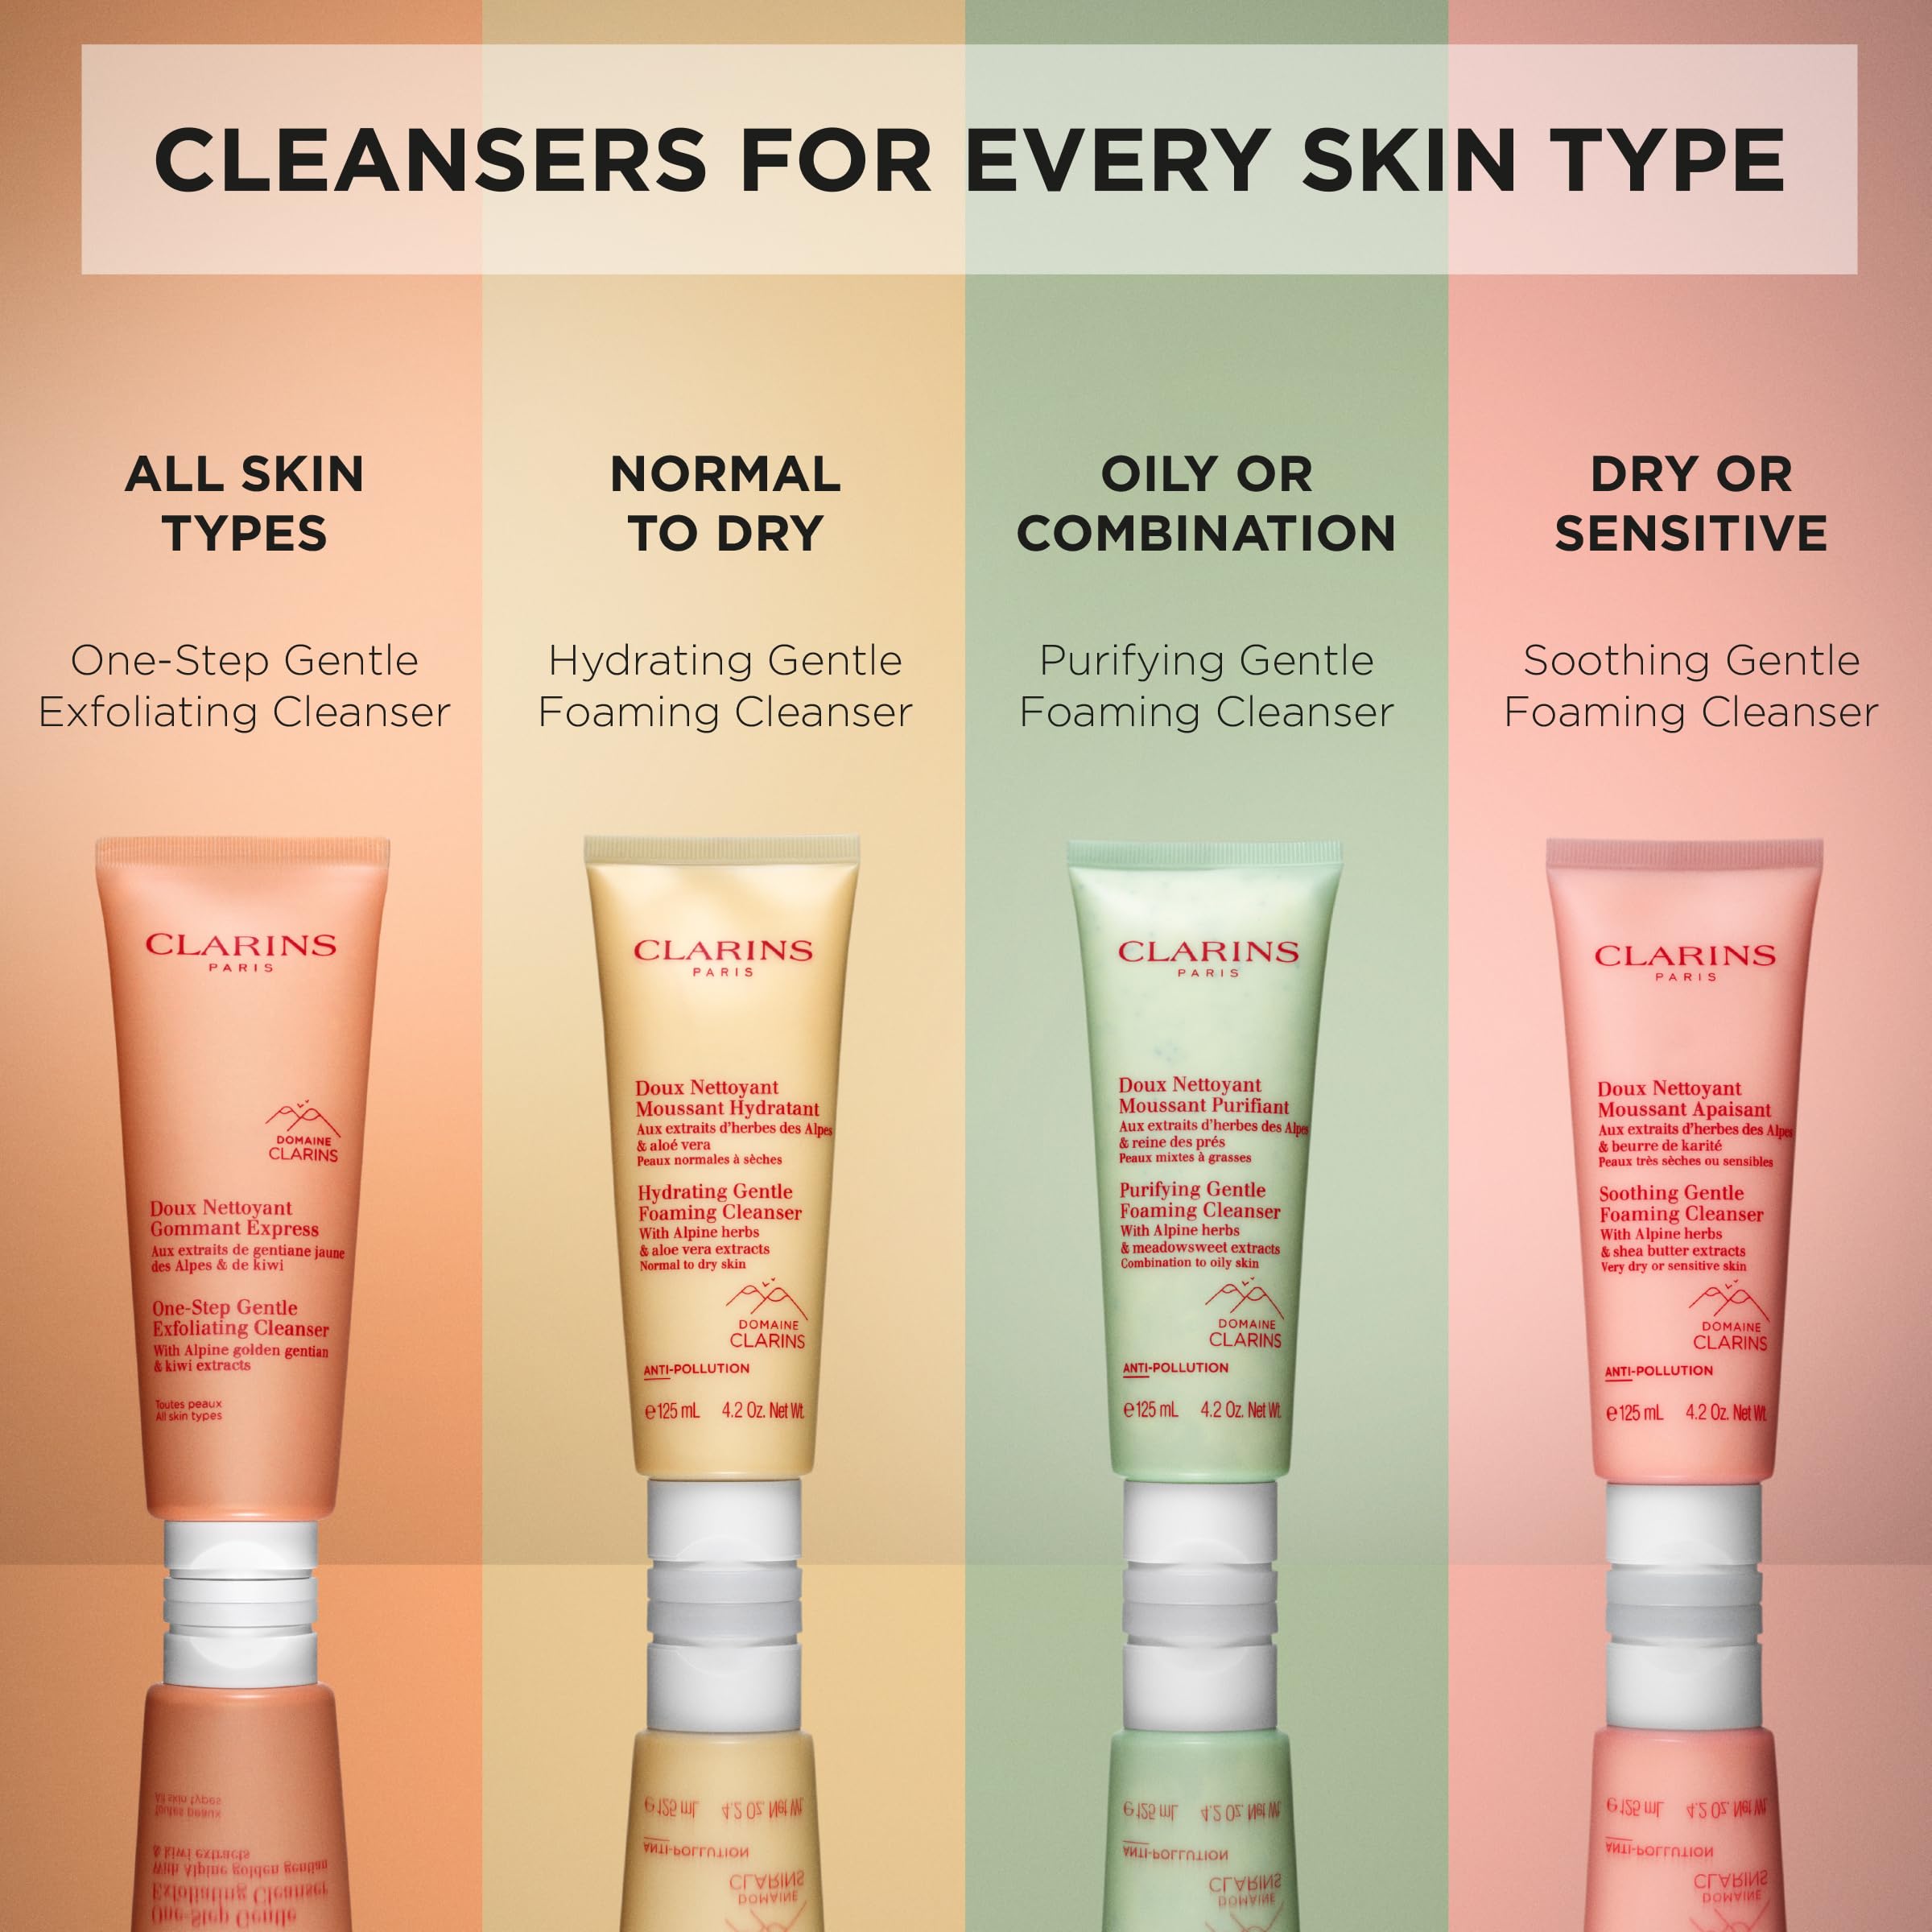 Clarins NEW One-Step Gentle Exfoliating Cleanser | 3-In-1 Cleanser, Makeup Remover and Exfoliator | Boosts Radiance | Plant-Based Exfoliating Beads | All Skin Types | 4.3 Ounces